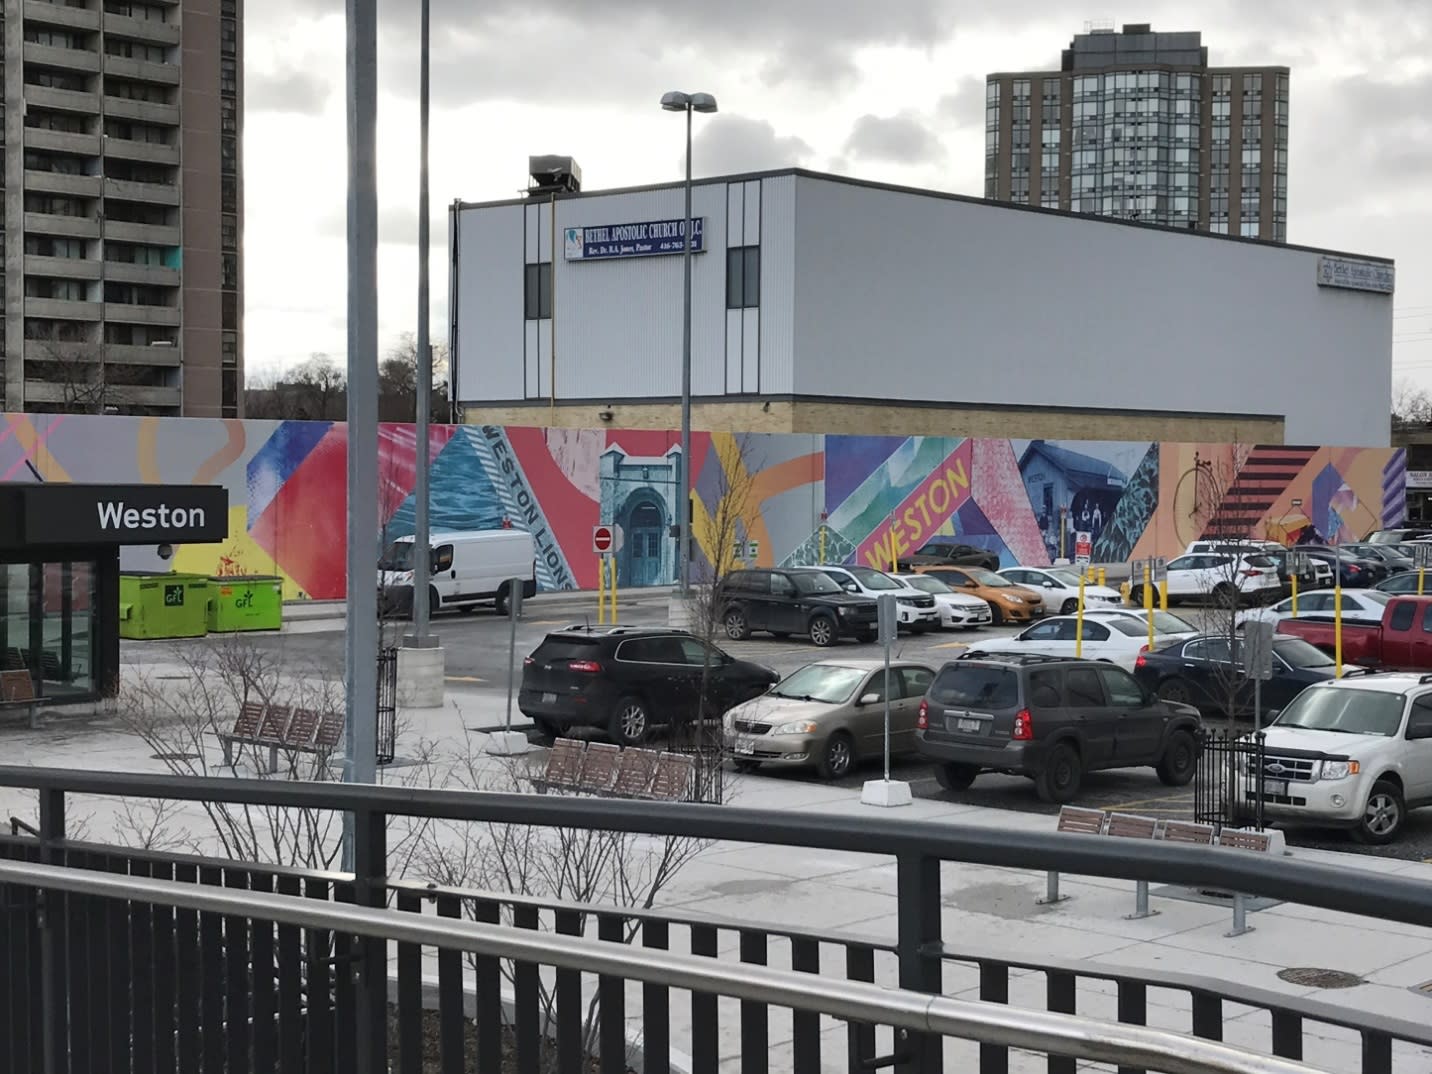 A wall mural is shown by the Weston station and parking lot.